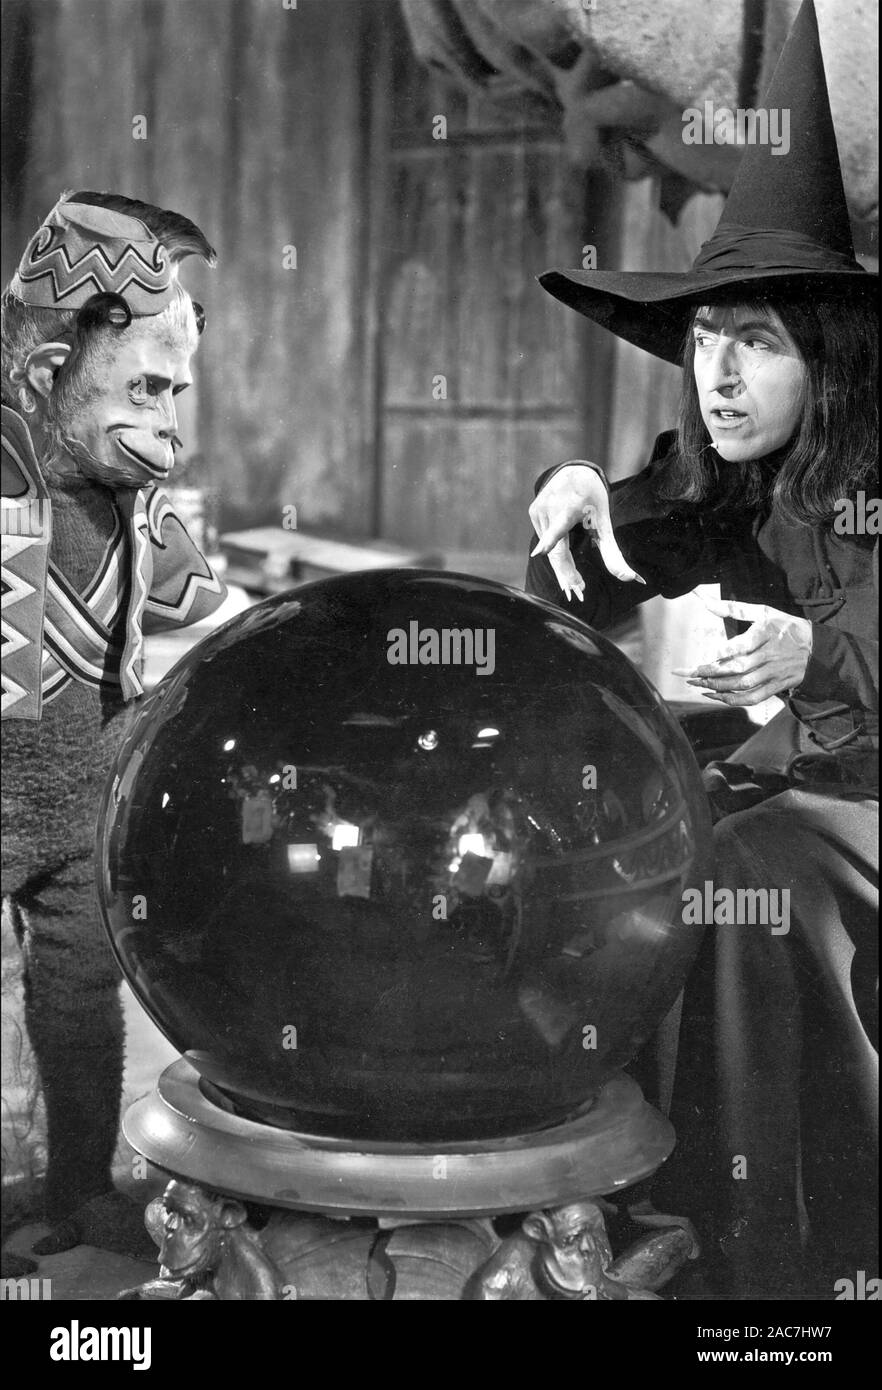 Wicked witch of the west Black and White Stock Photos & Images - Alamy